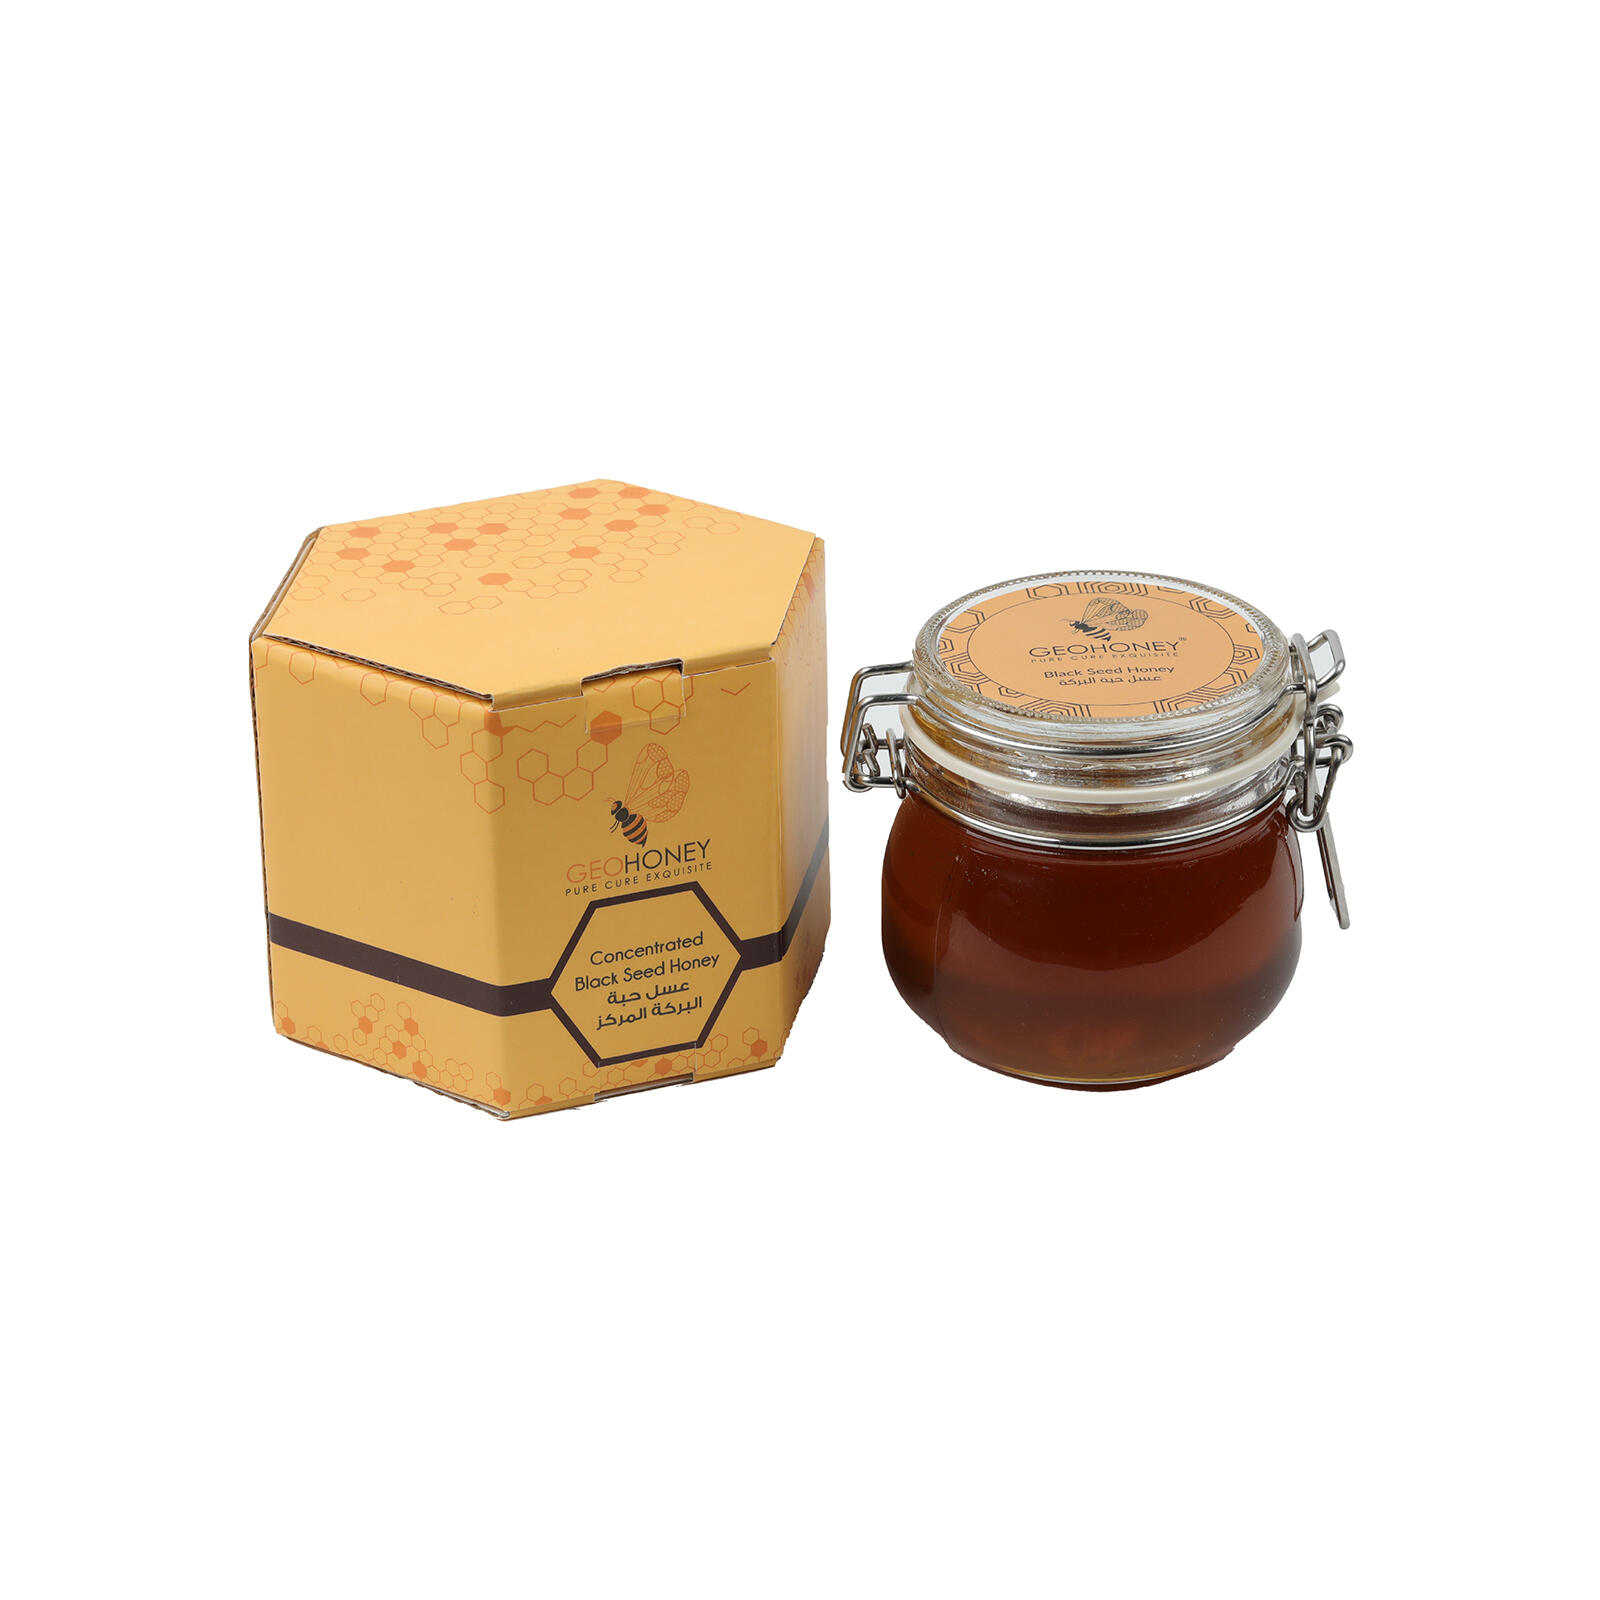 Black Seed Honey Concentrated - 200gm